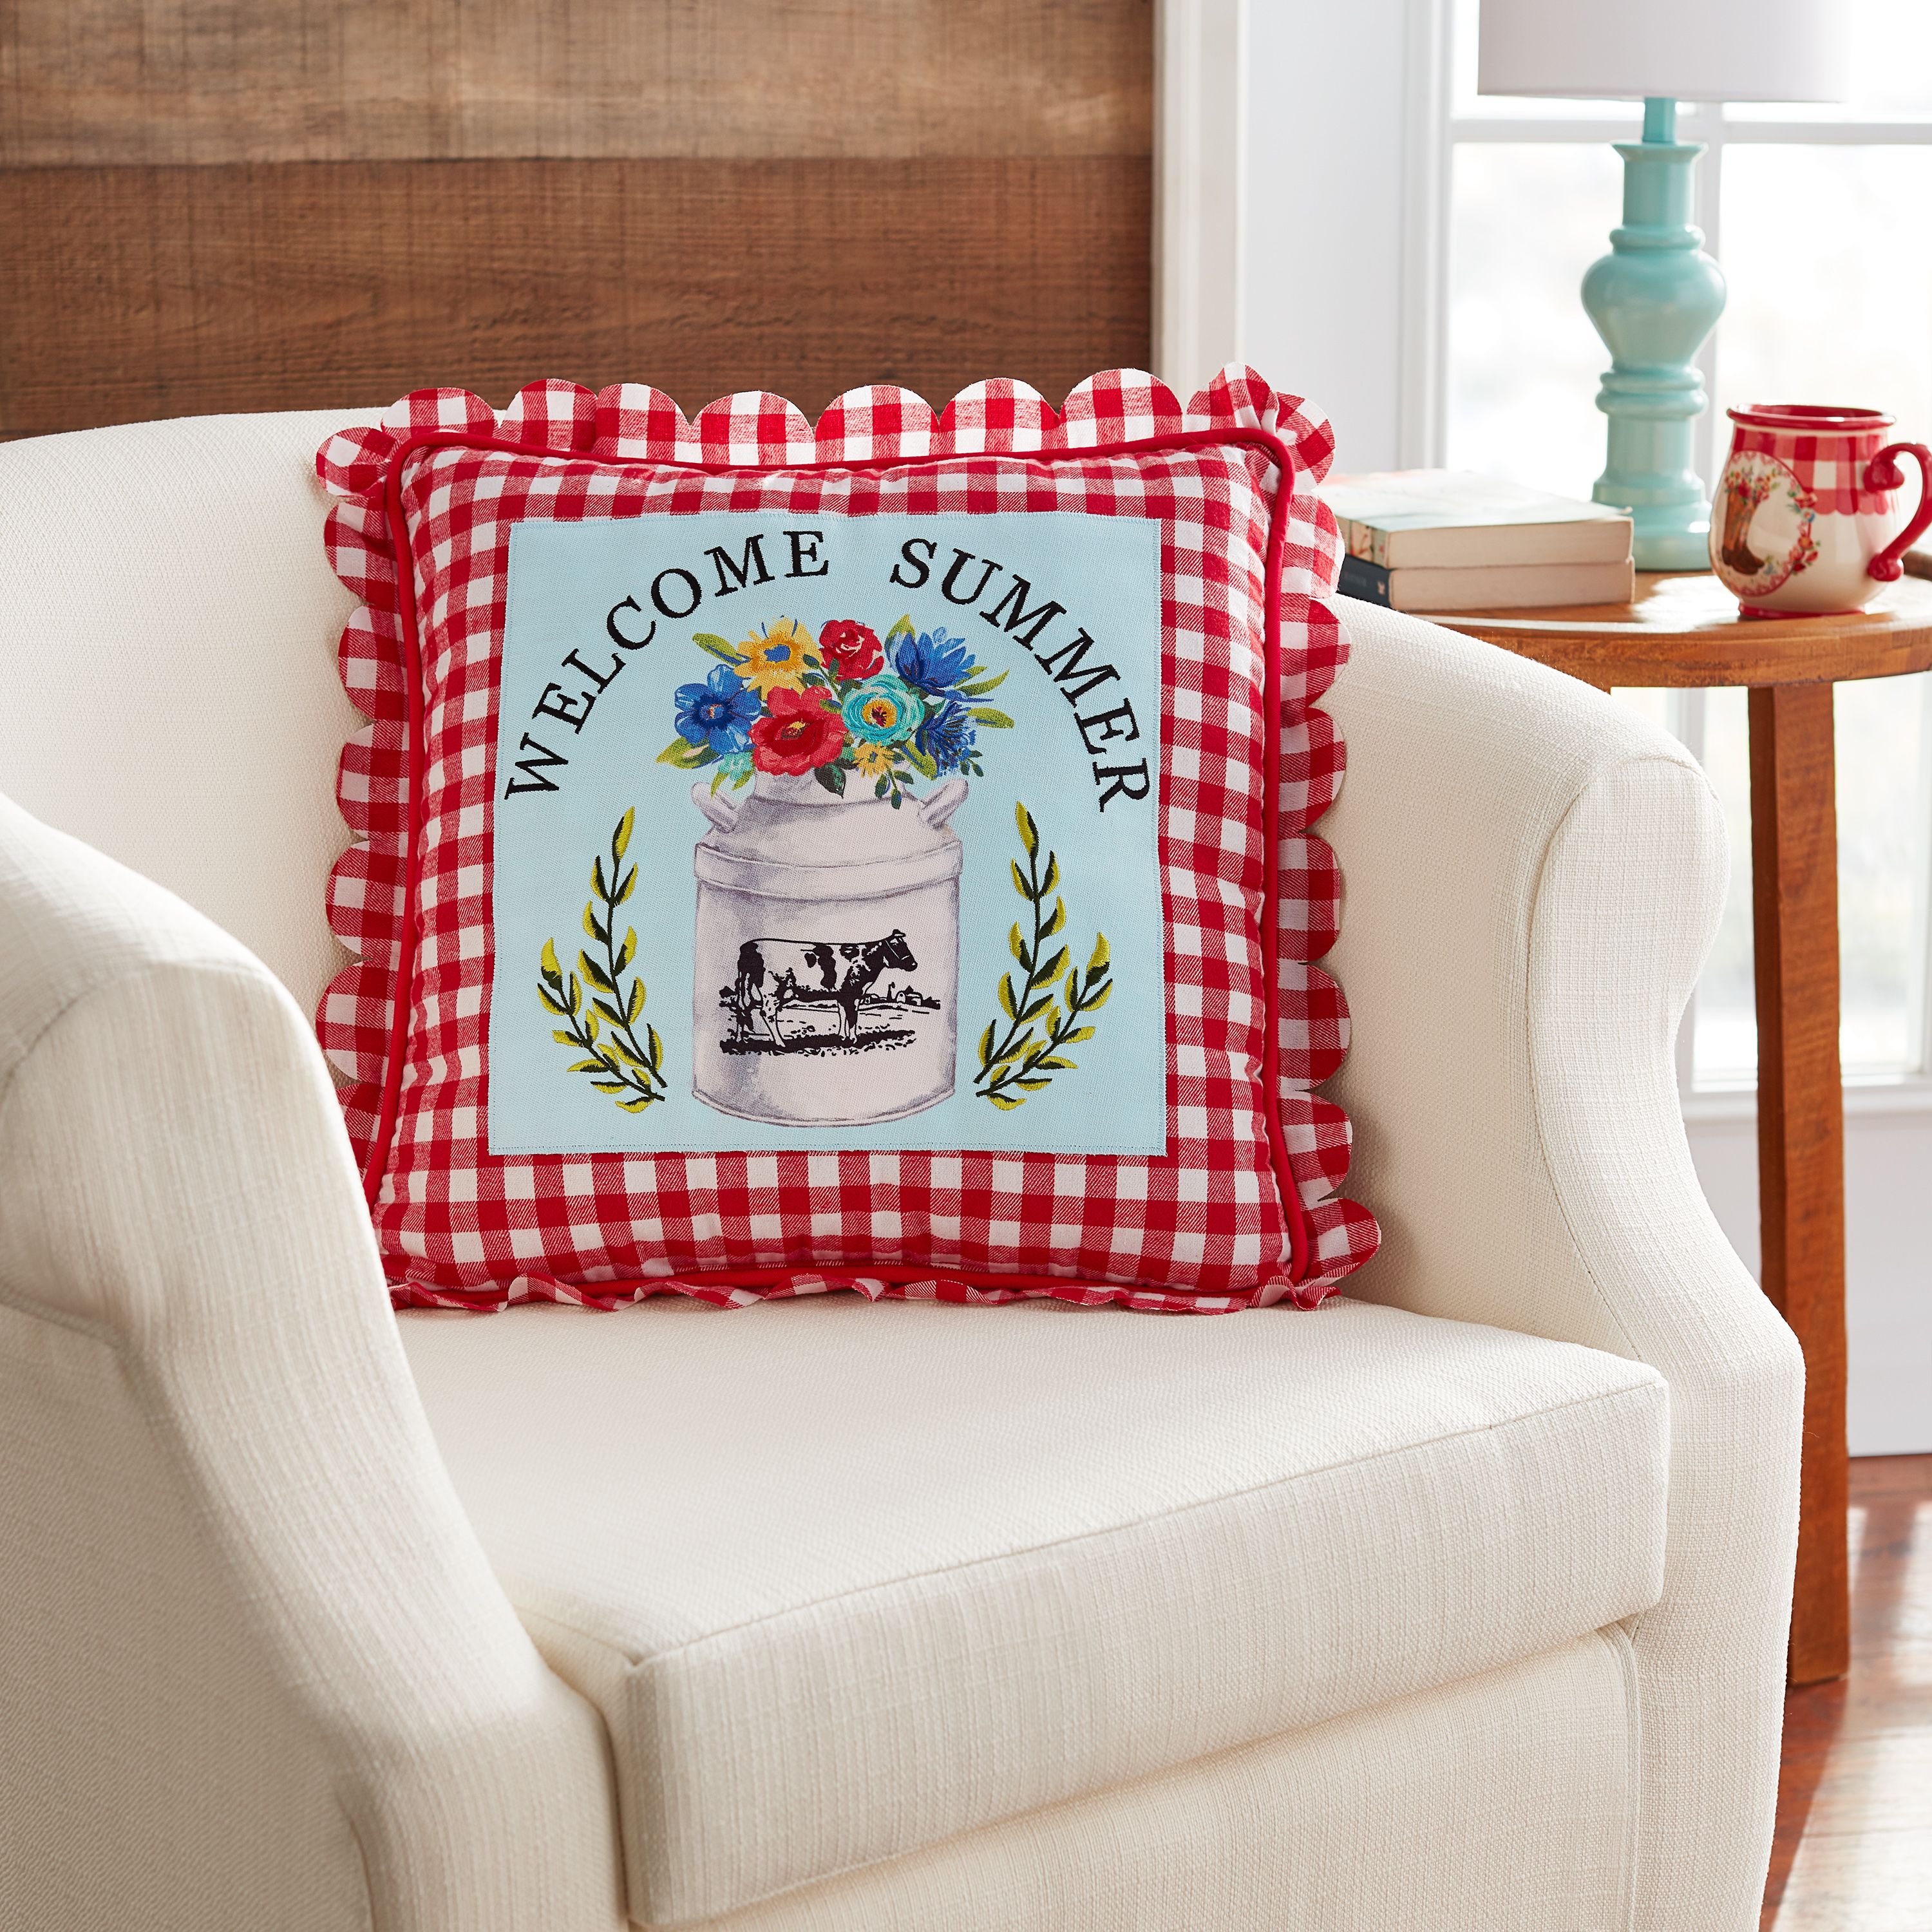 The Pioneer Woman 'Wecome Summer' Decorative Throw Pillow